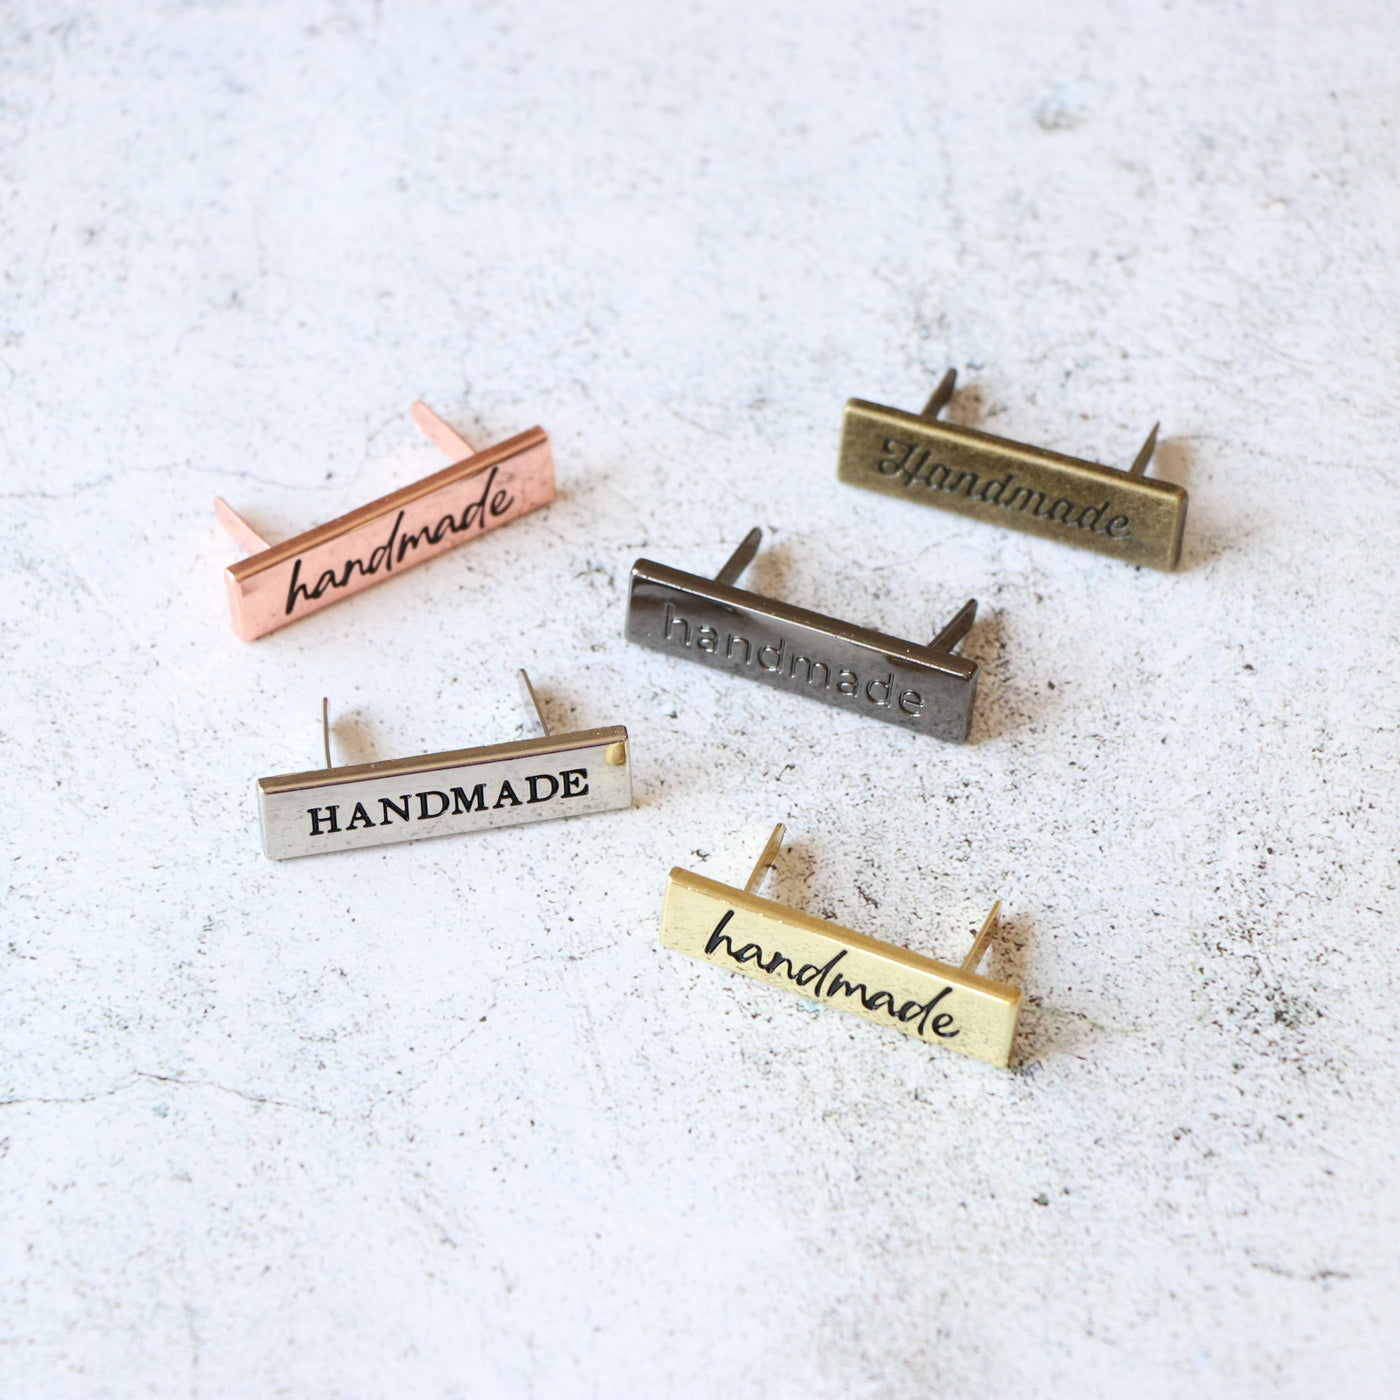 4-Pack of Handmade Labels